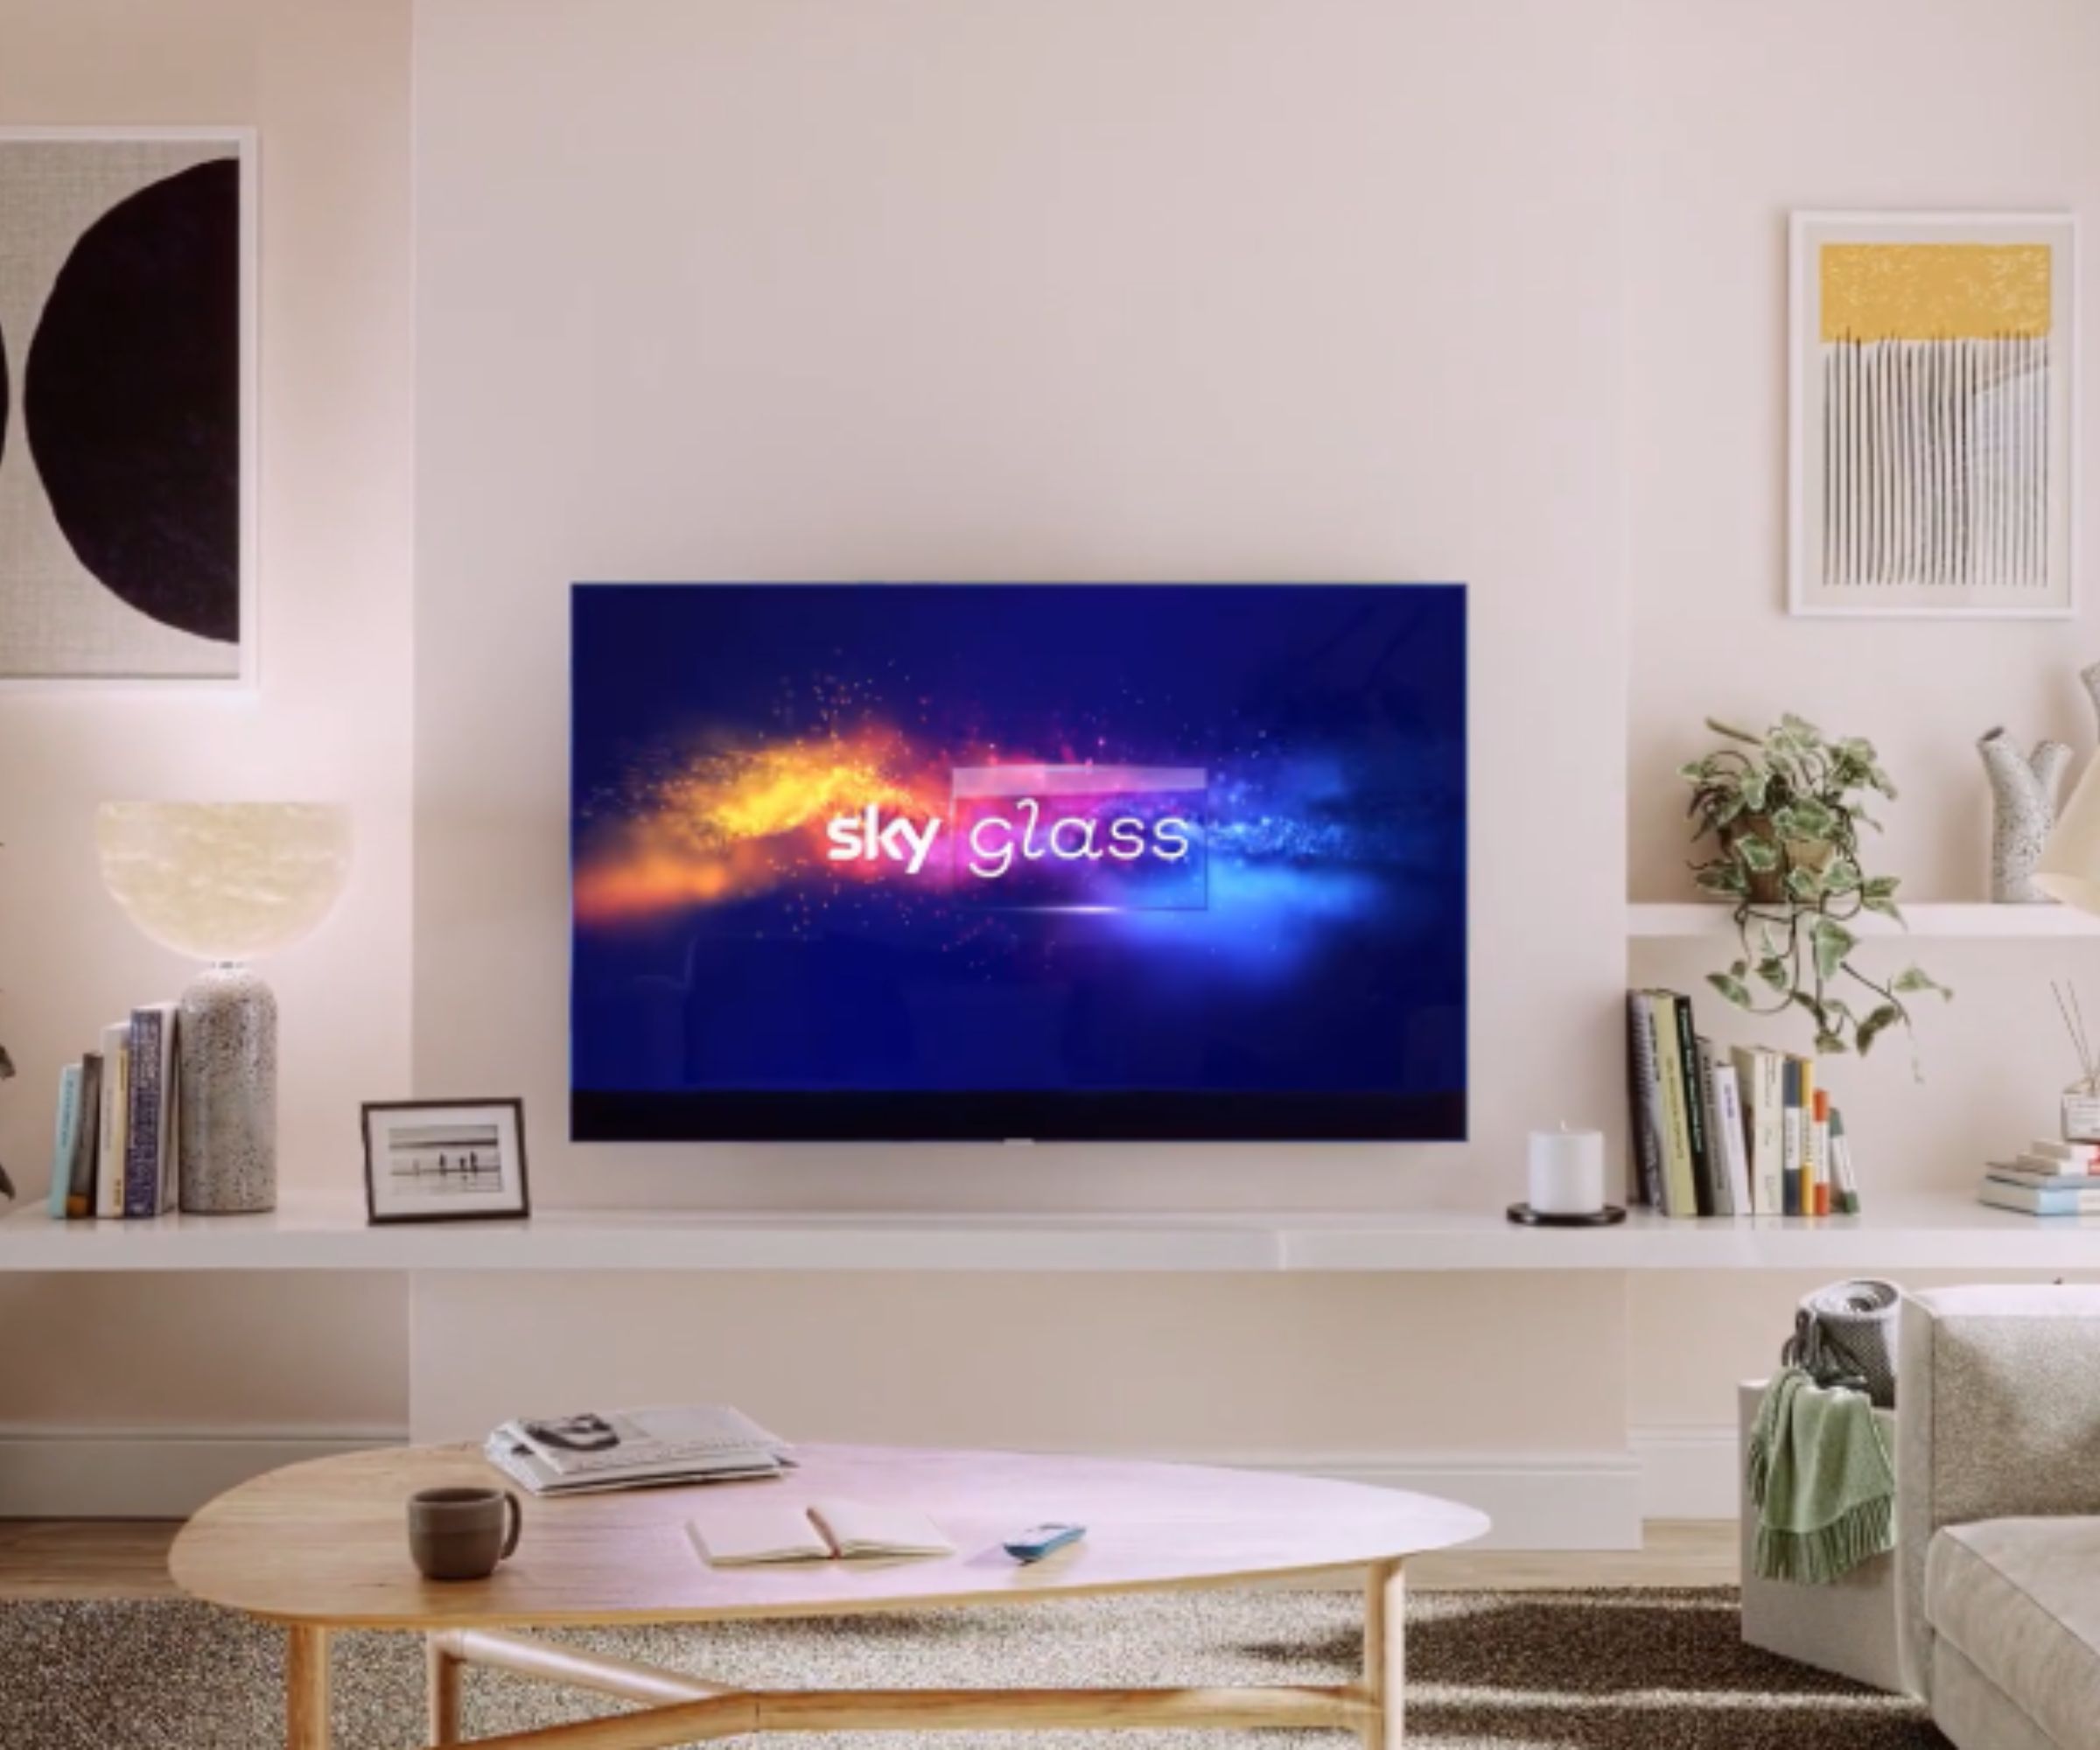 The Sky Glass TV mounted on a wall